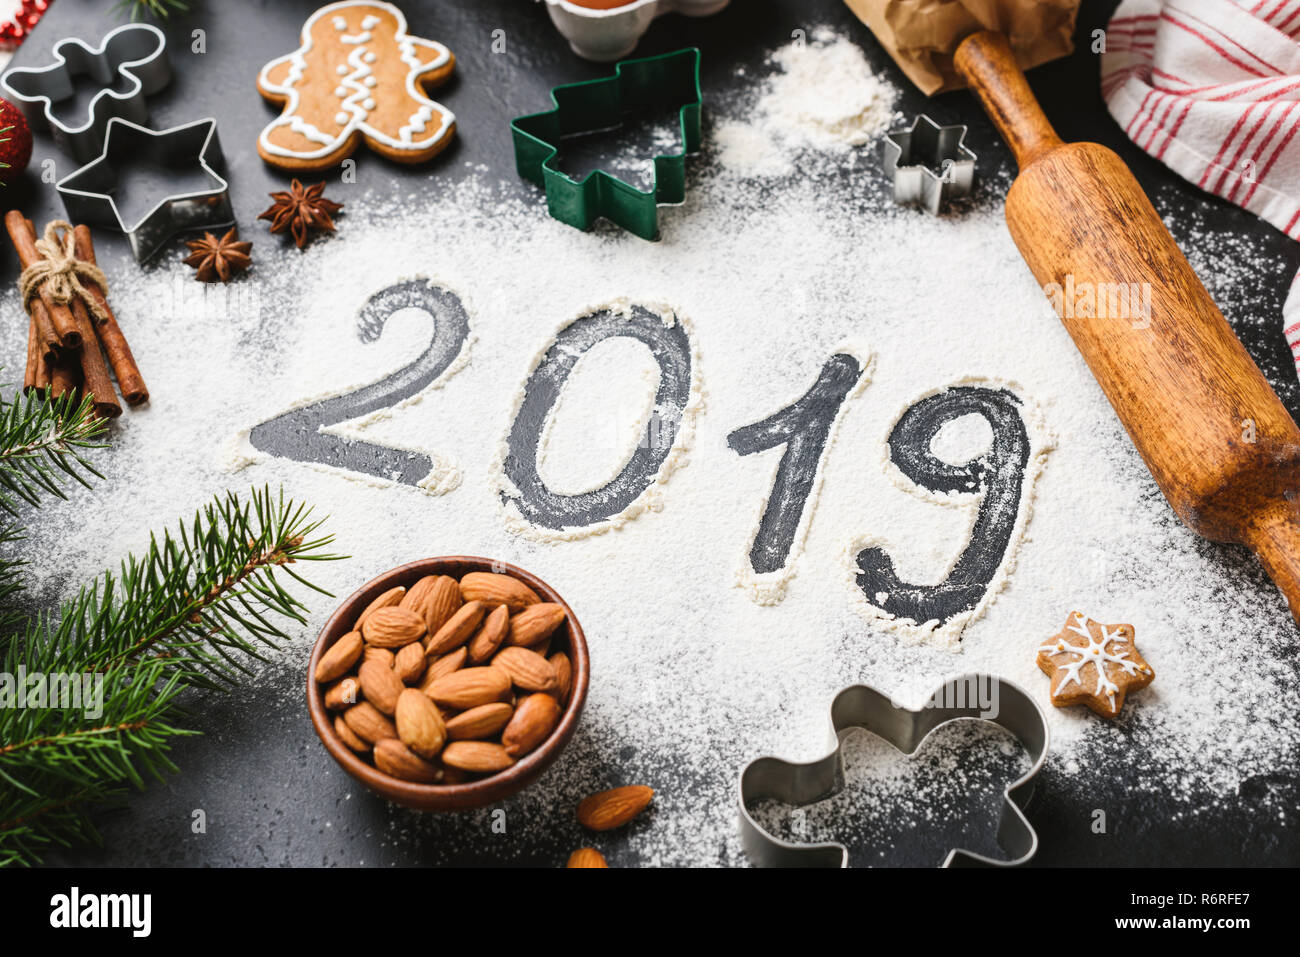 2019 New Year greeting written on flour. Winter holidays still life composition Stock Photo